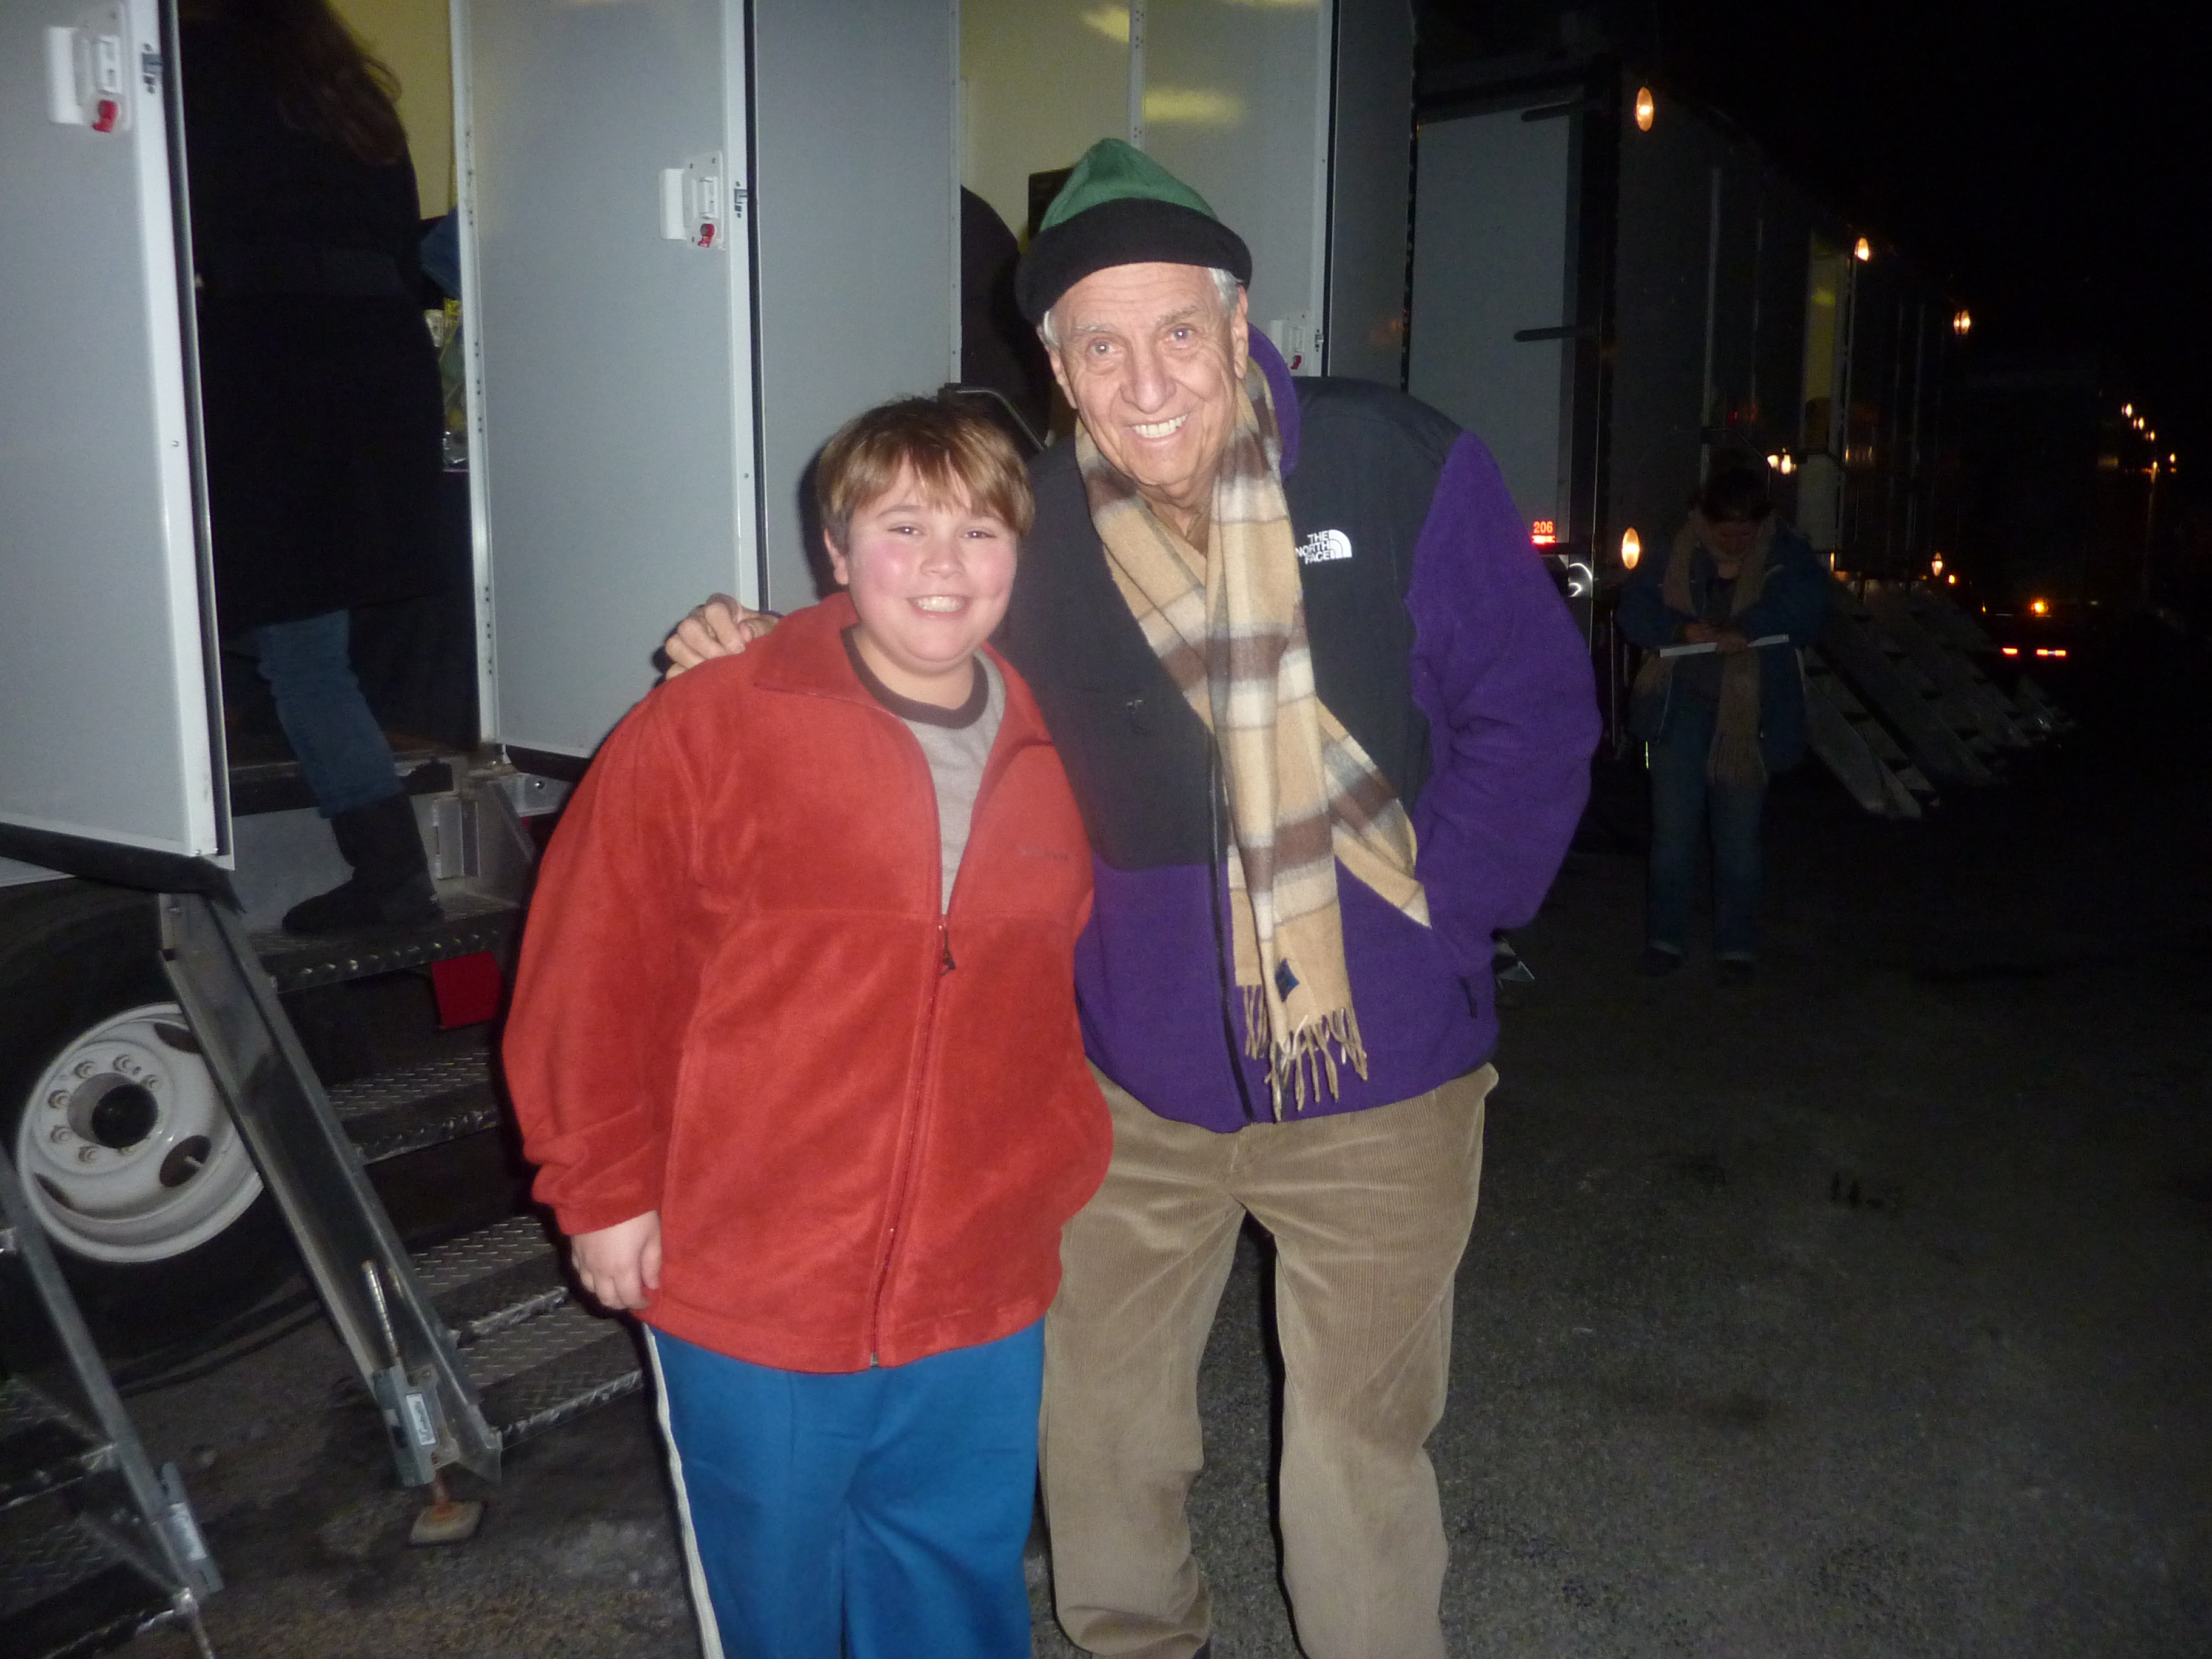 Jon-Christian with Director Garry Marshall on the set of New Years Eve.